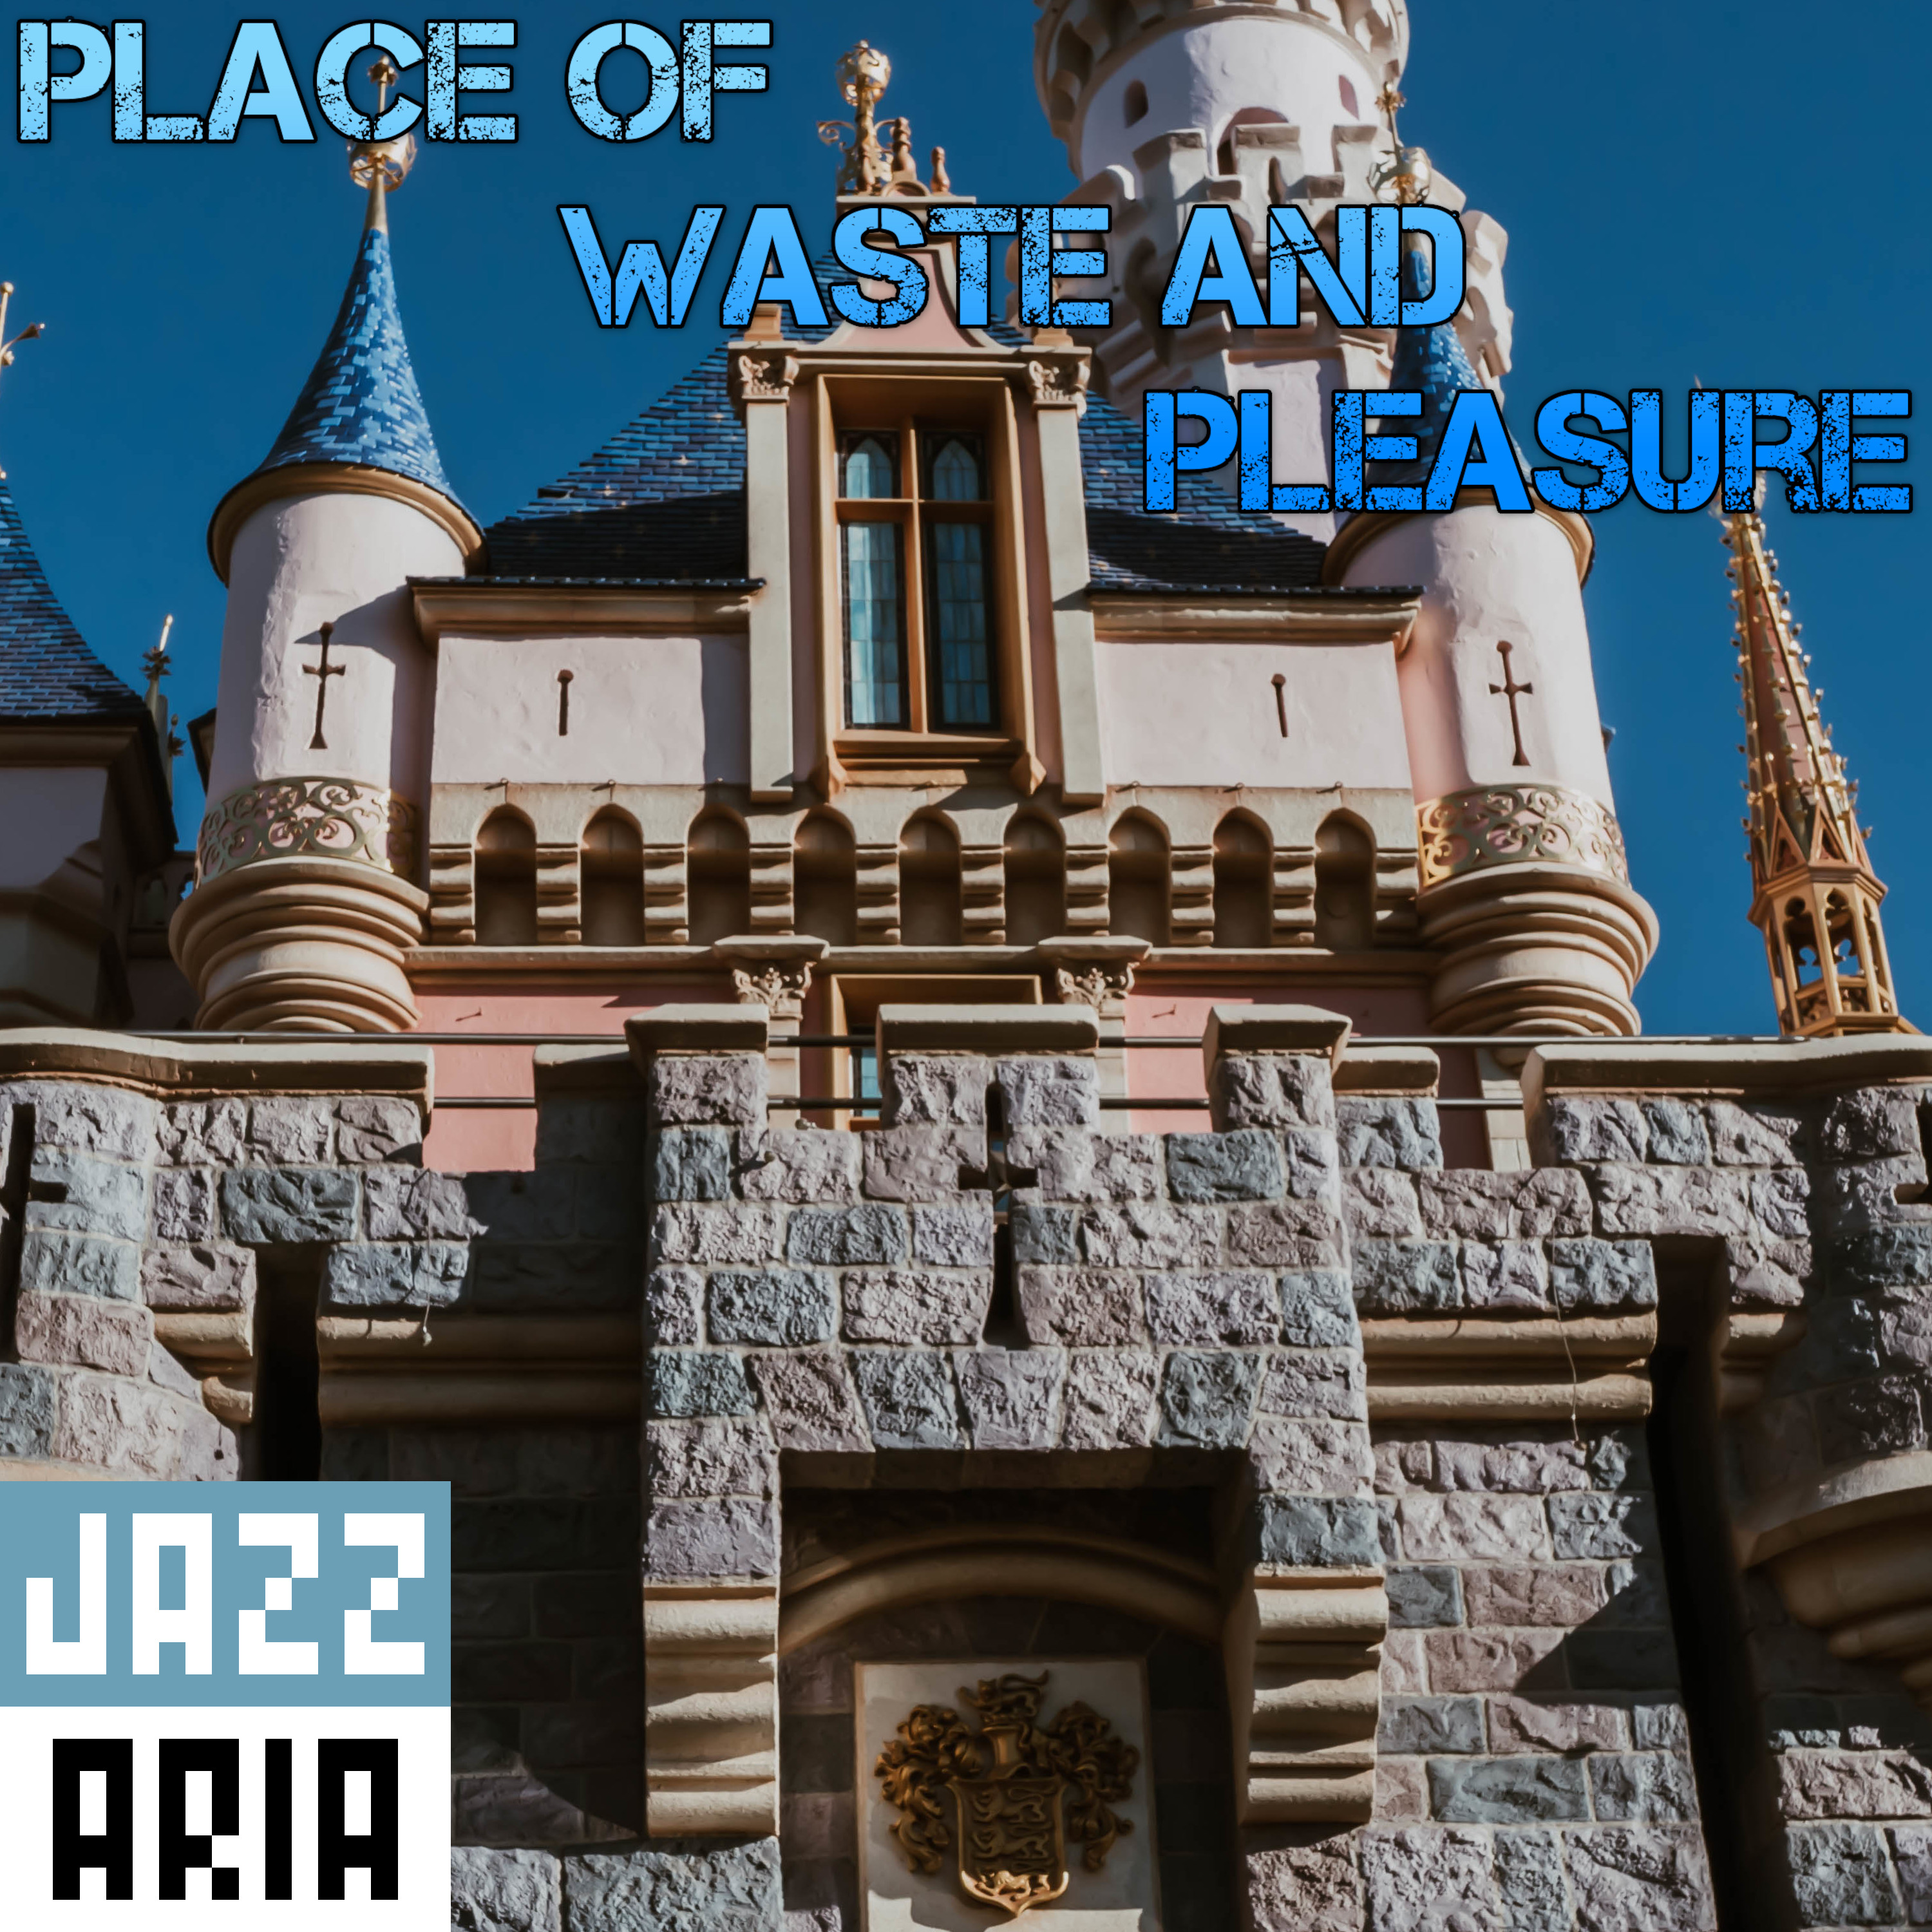 Jazzaria – Place of Waste and Pleasure